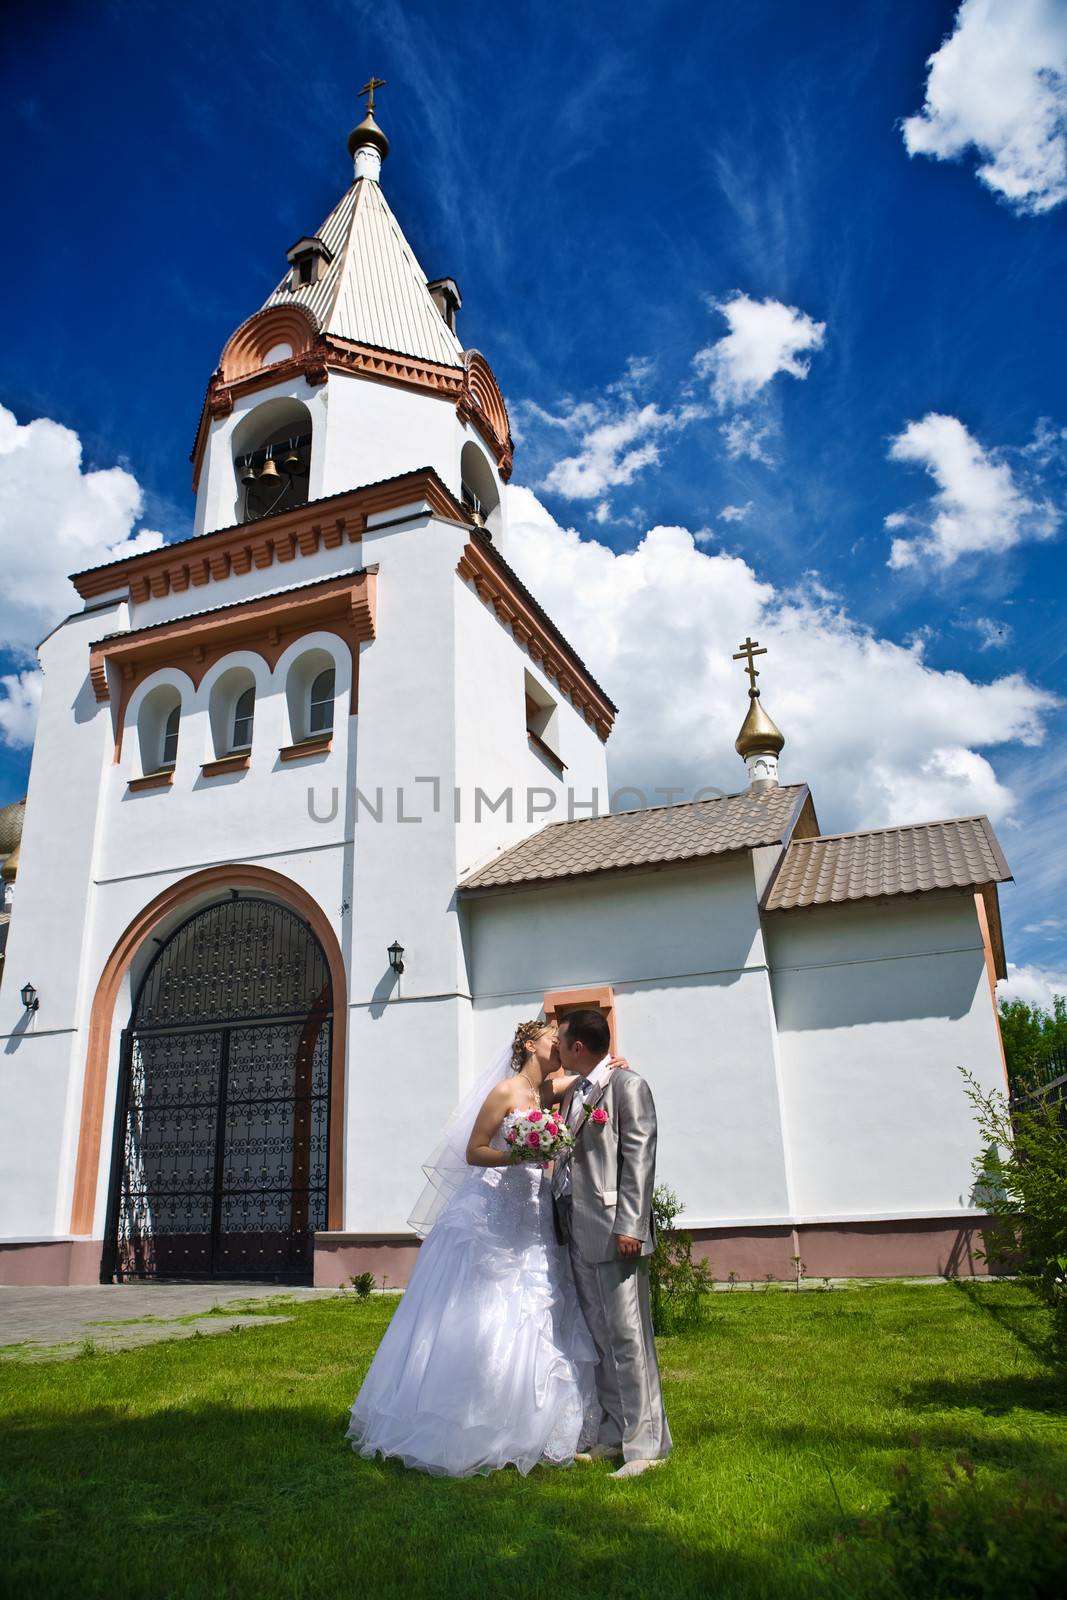 Newly married kiss on a background of church by mihalec